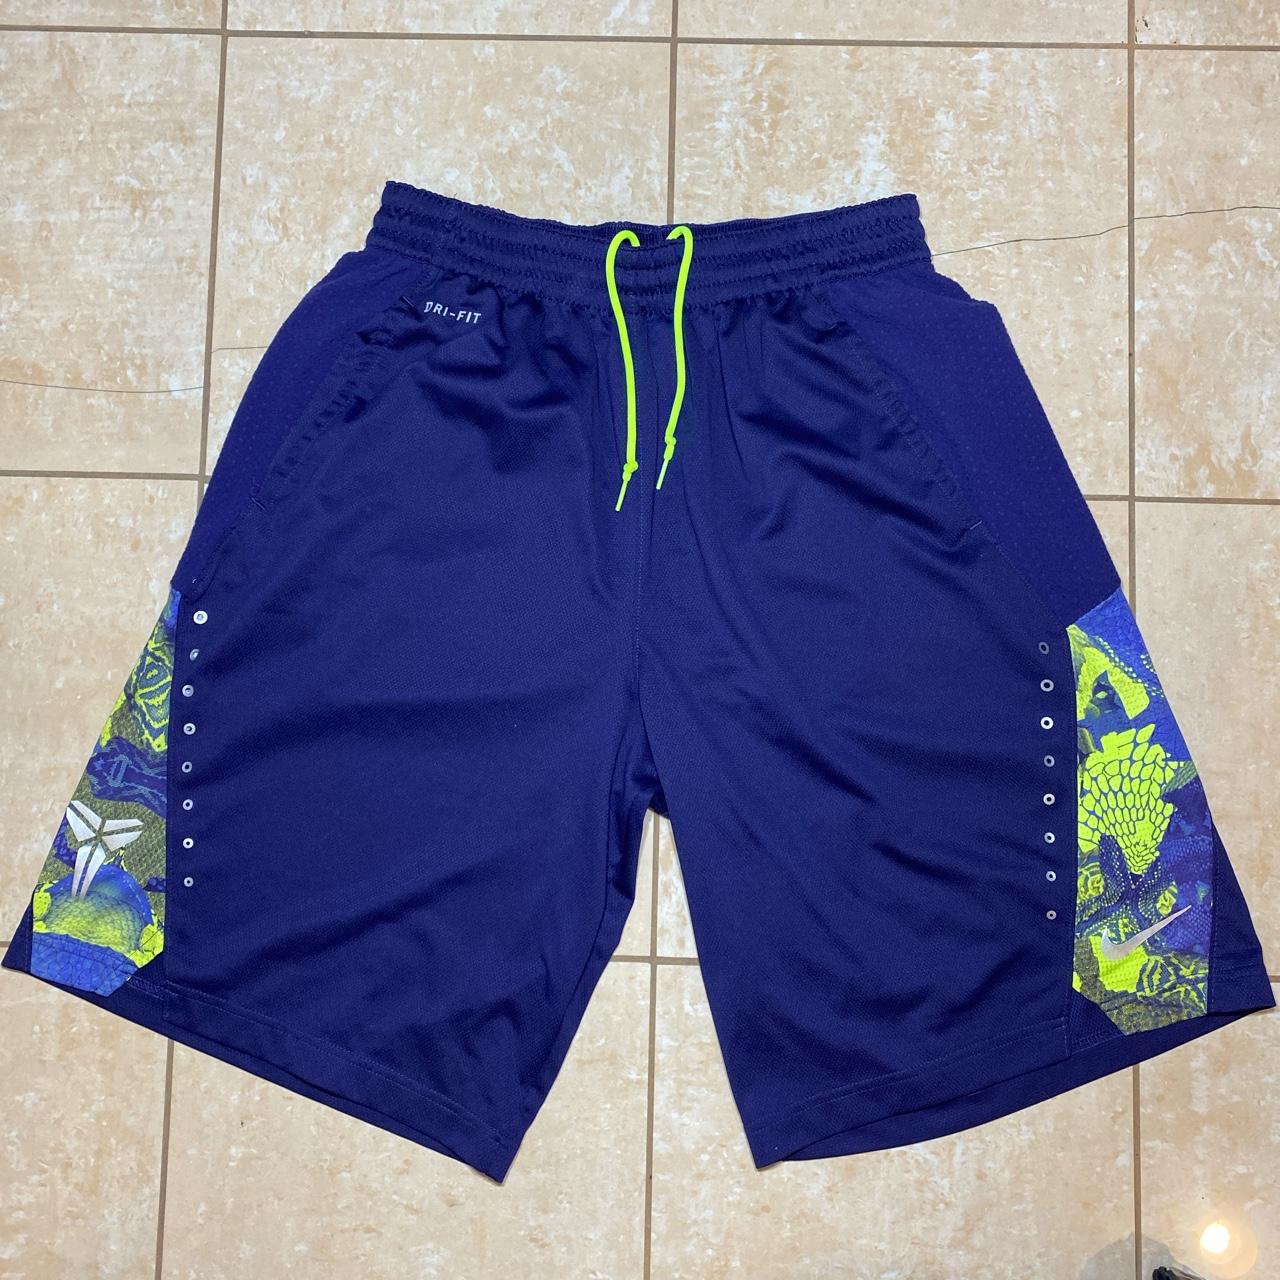 Just Don Shorts - CHICAGO BULLS, Men's Fashion, Bottoms, Shorts on Carousell